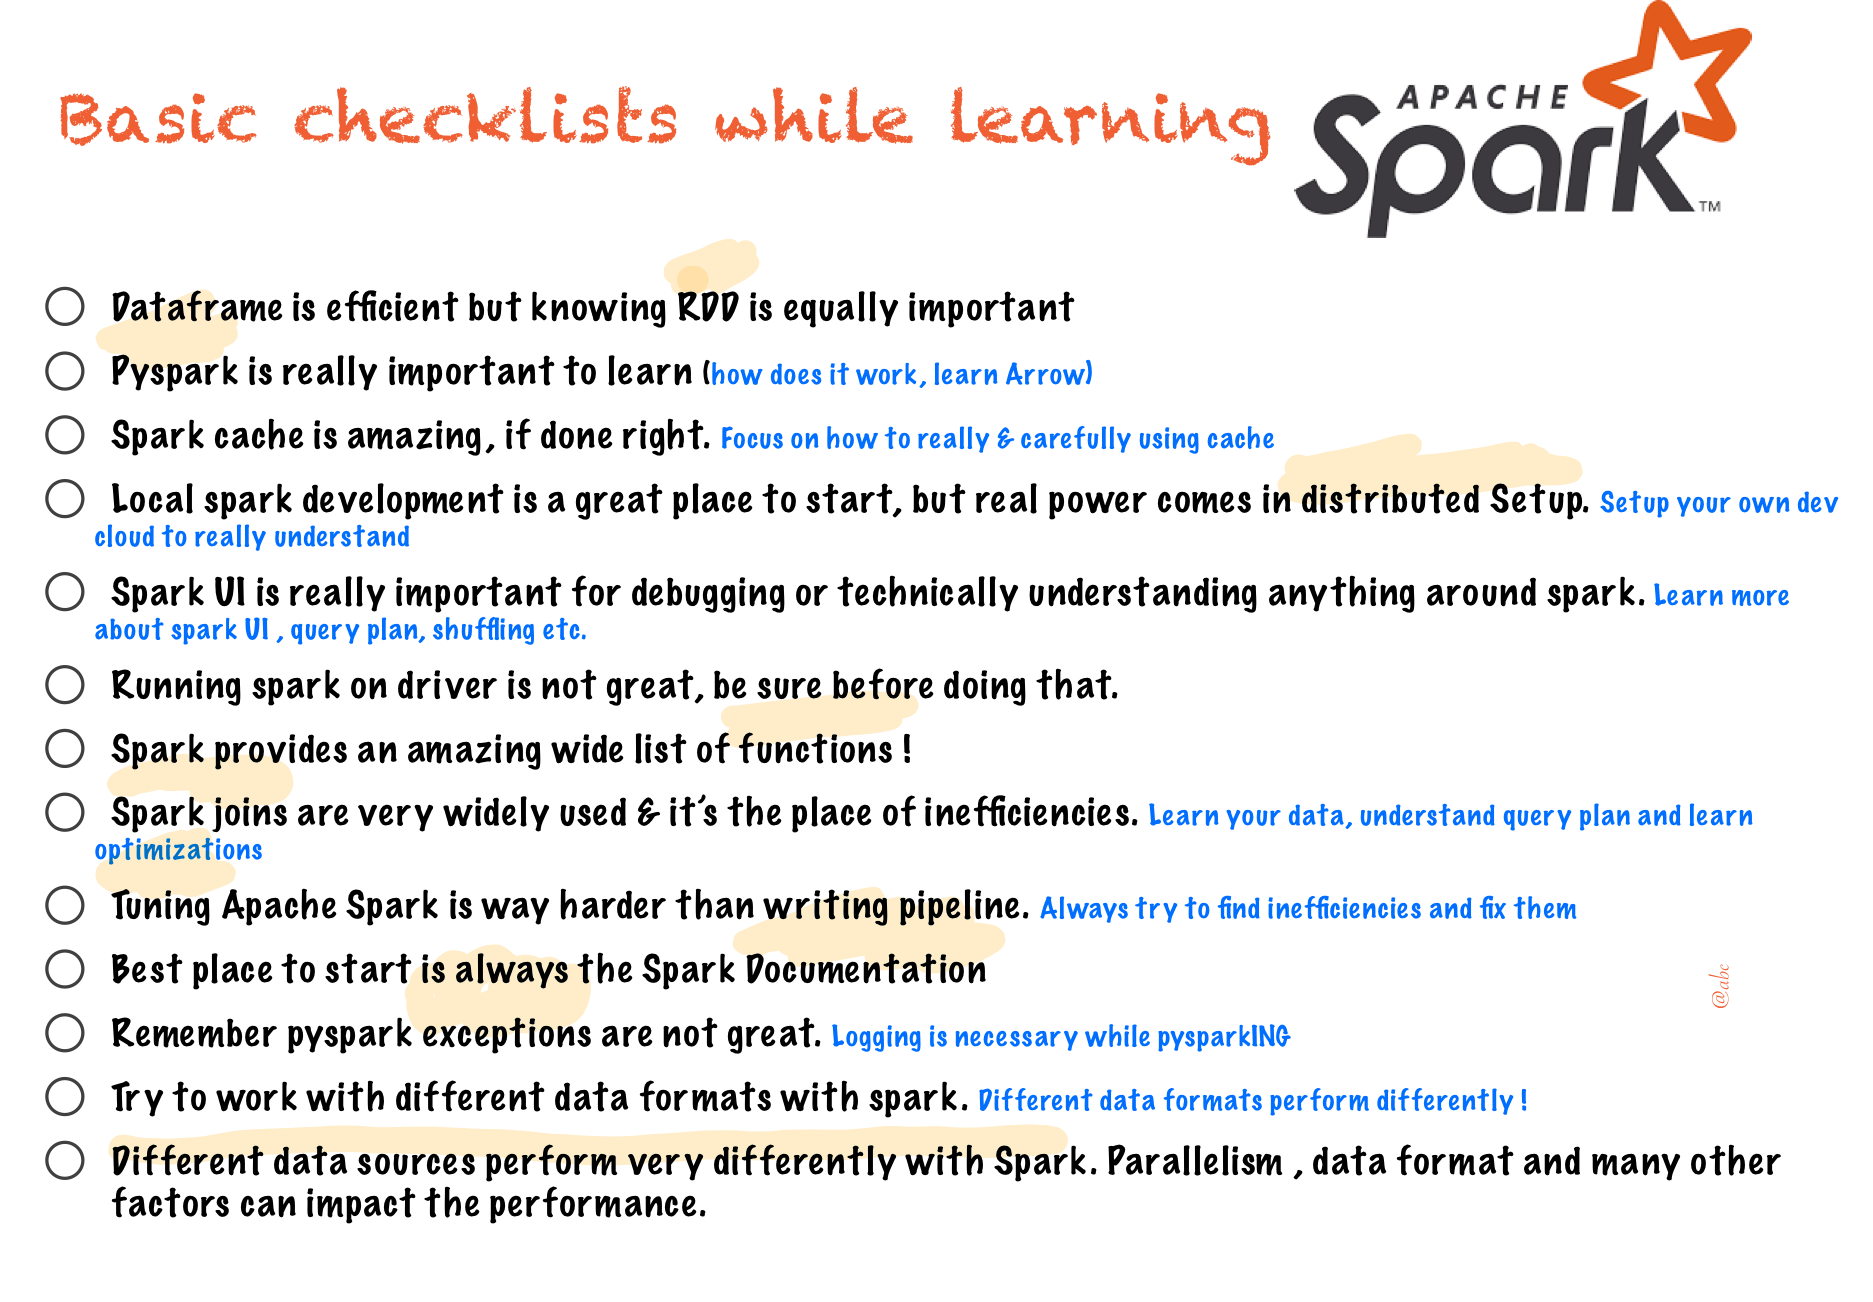 Basic Checklists while learning Apache Spark